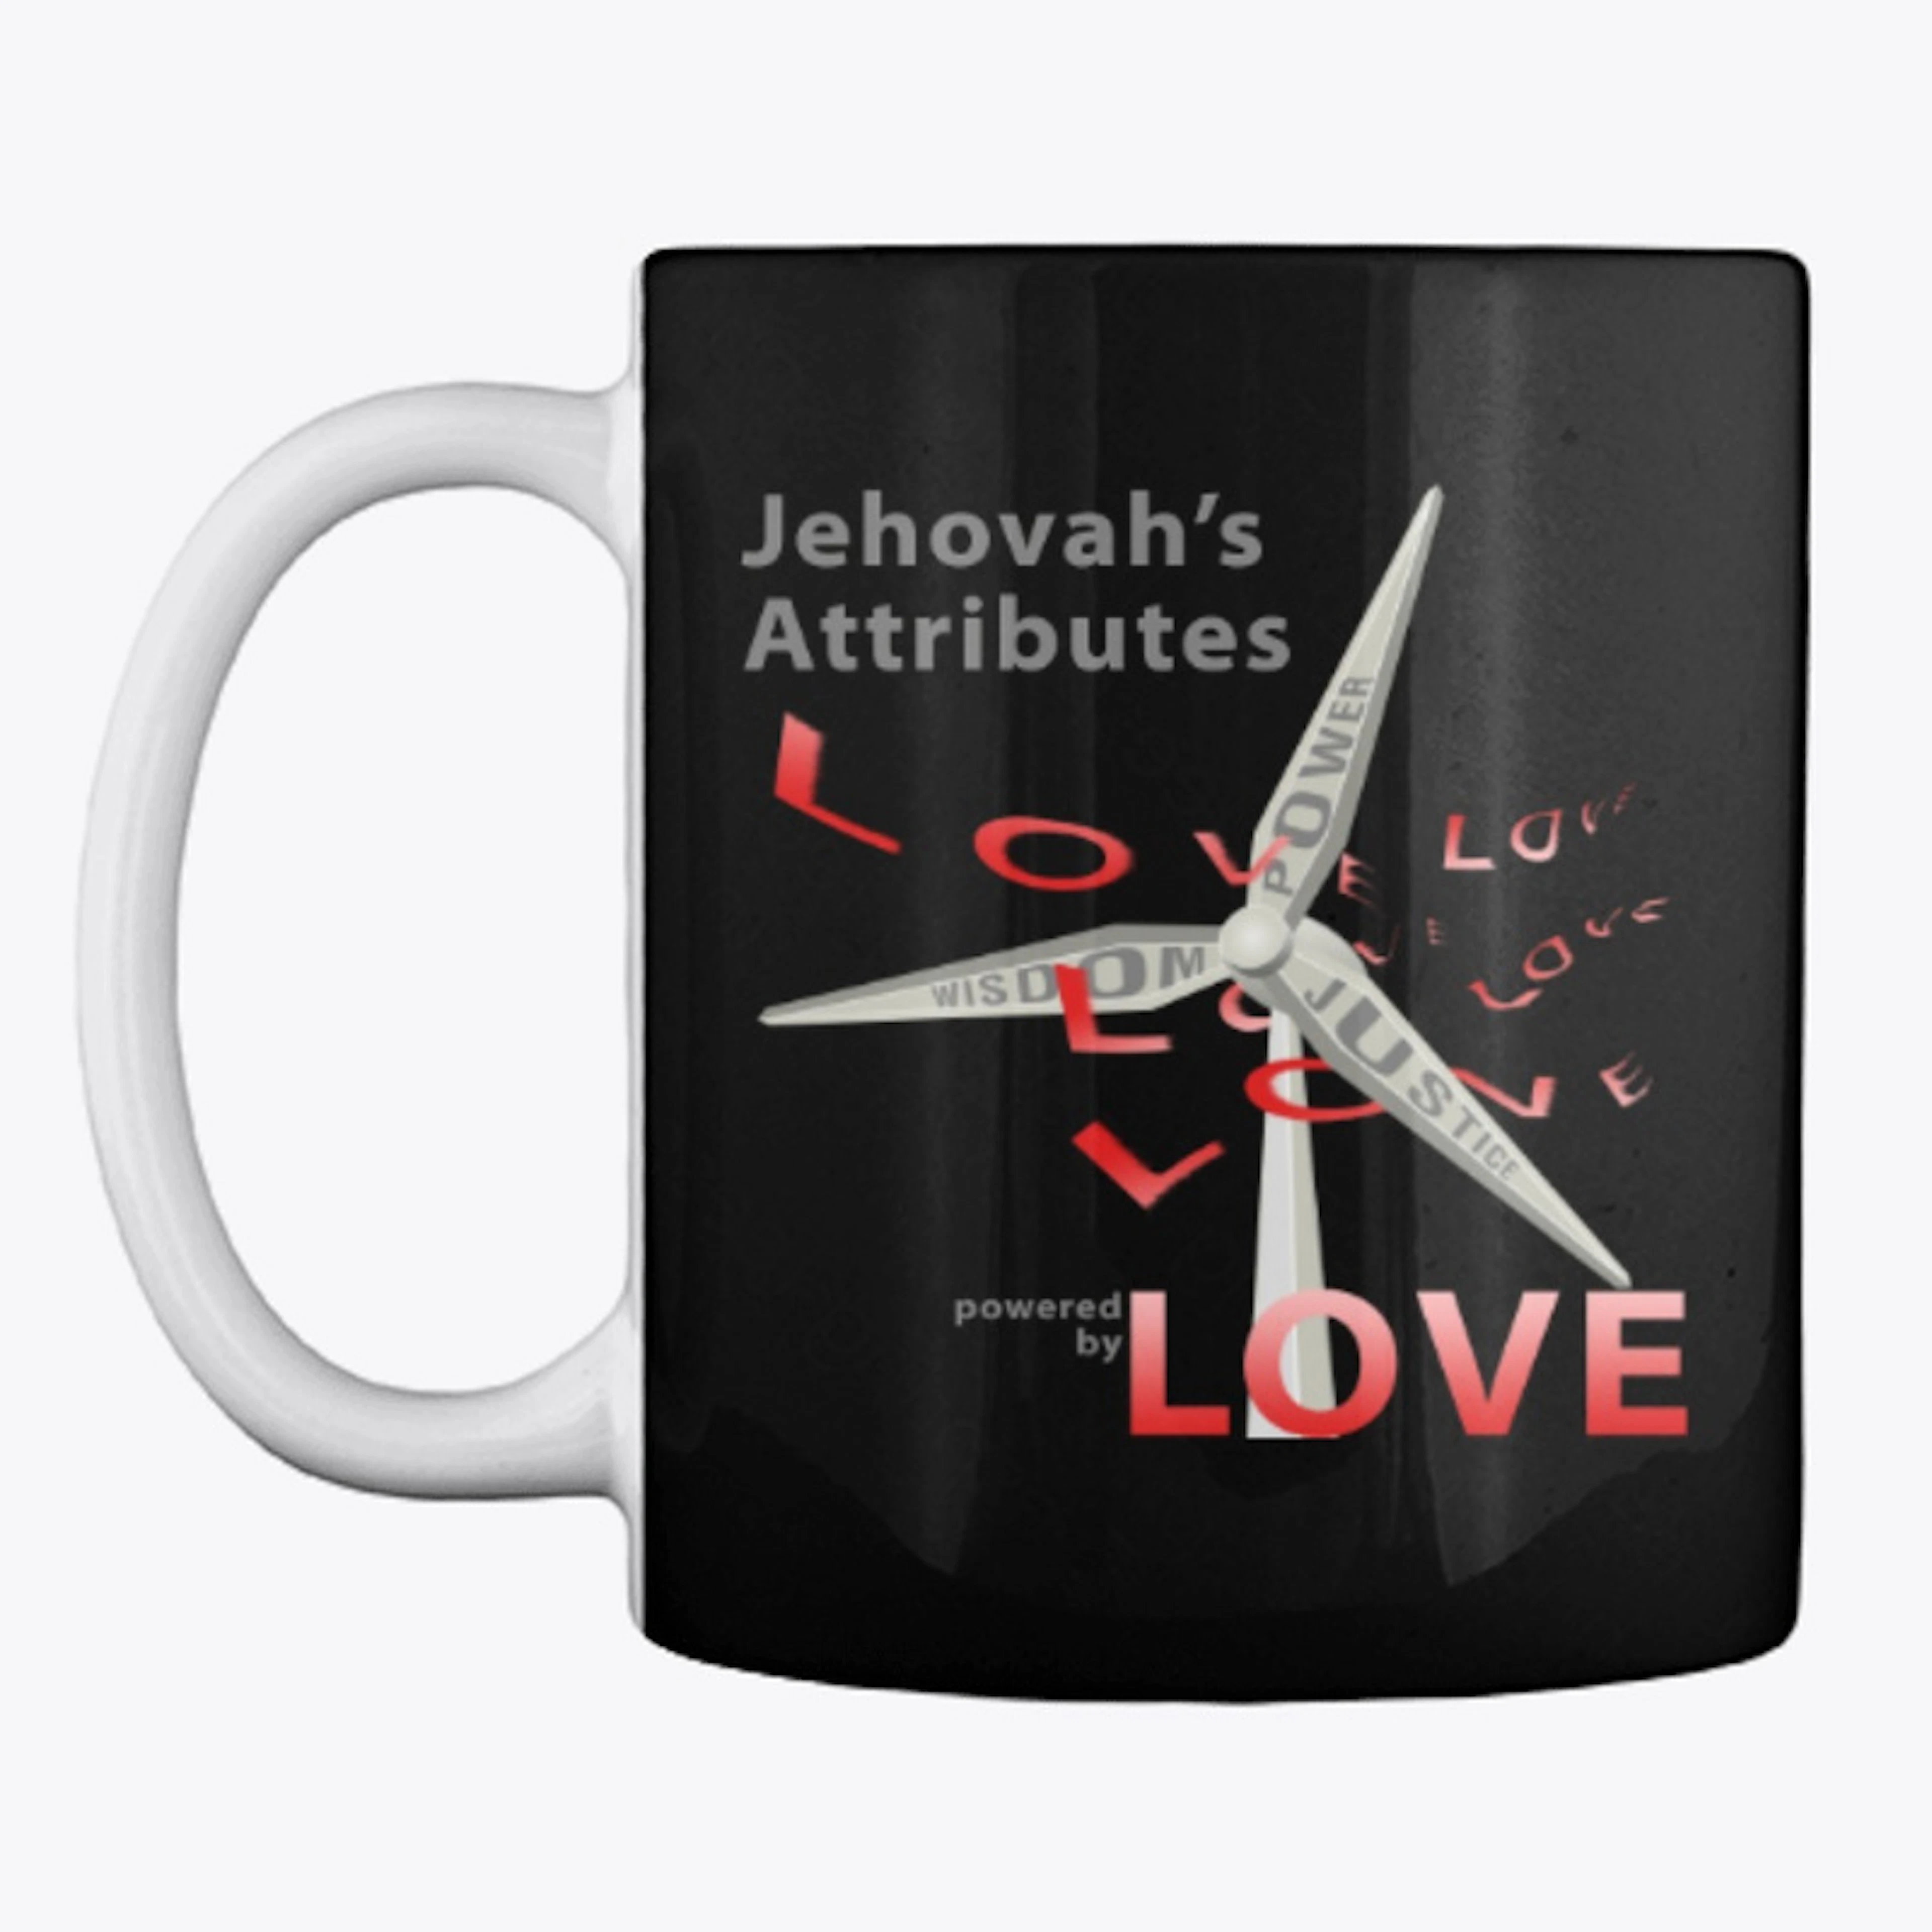 Jehovah's Attributes Powered by Love